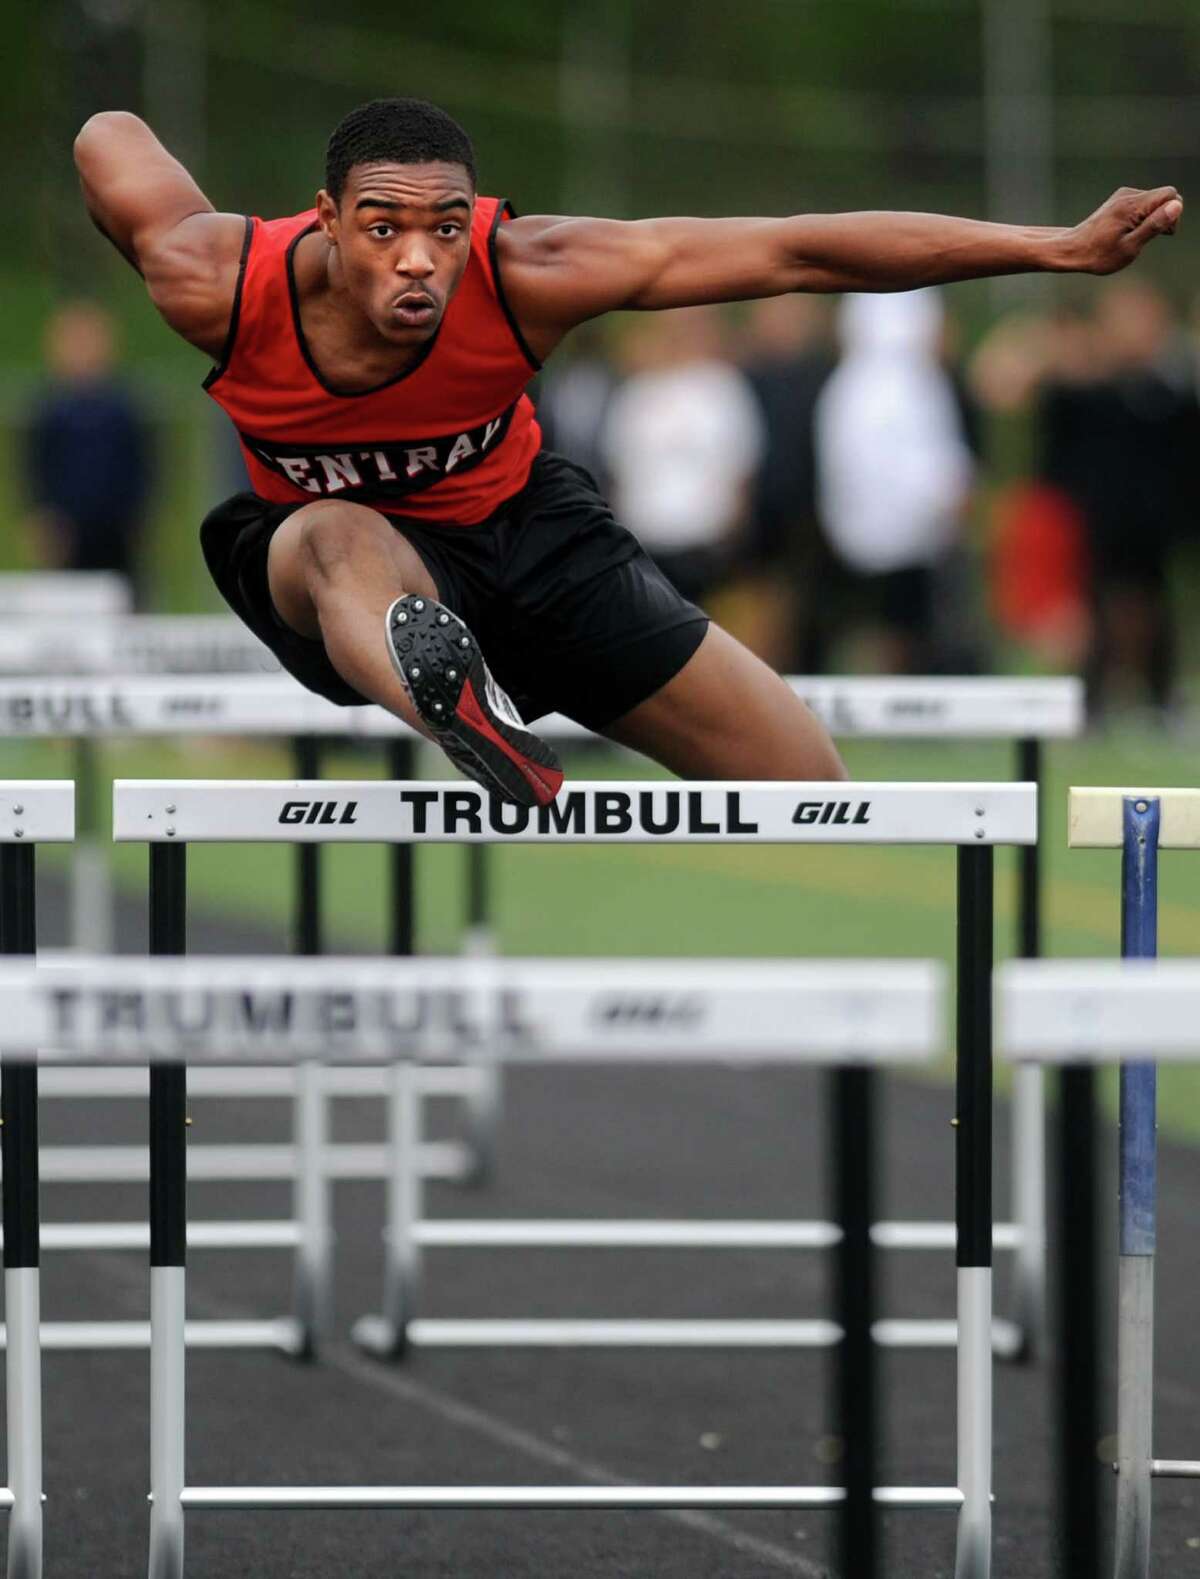 Central's Andre Aiken competes in the 110 meter hurdles Tuesday, April 24, 2012 during a track meet with Staples and Trumbull at Trumbull High School.